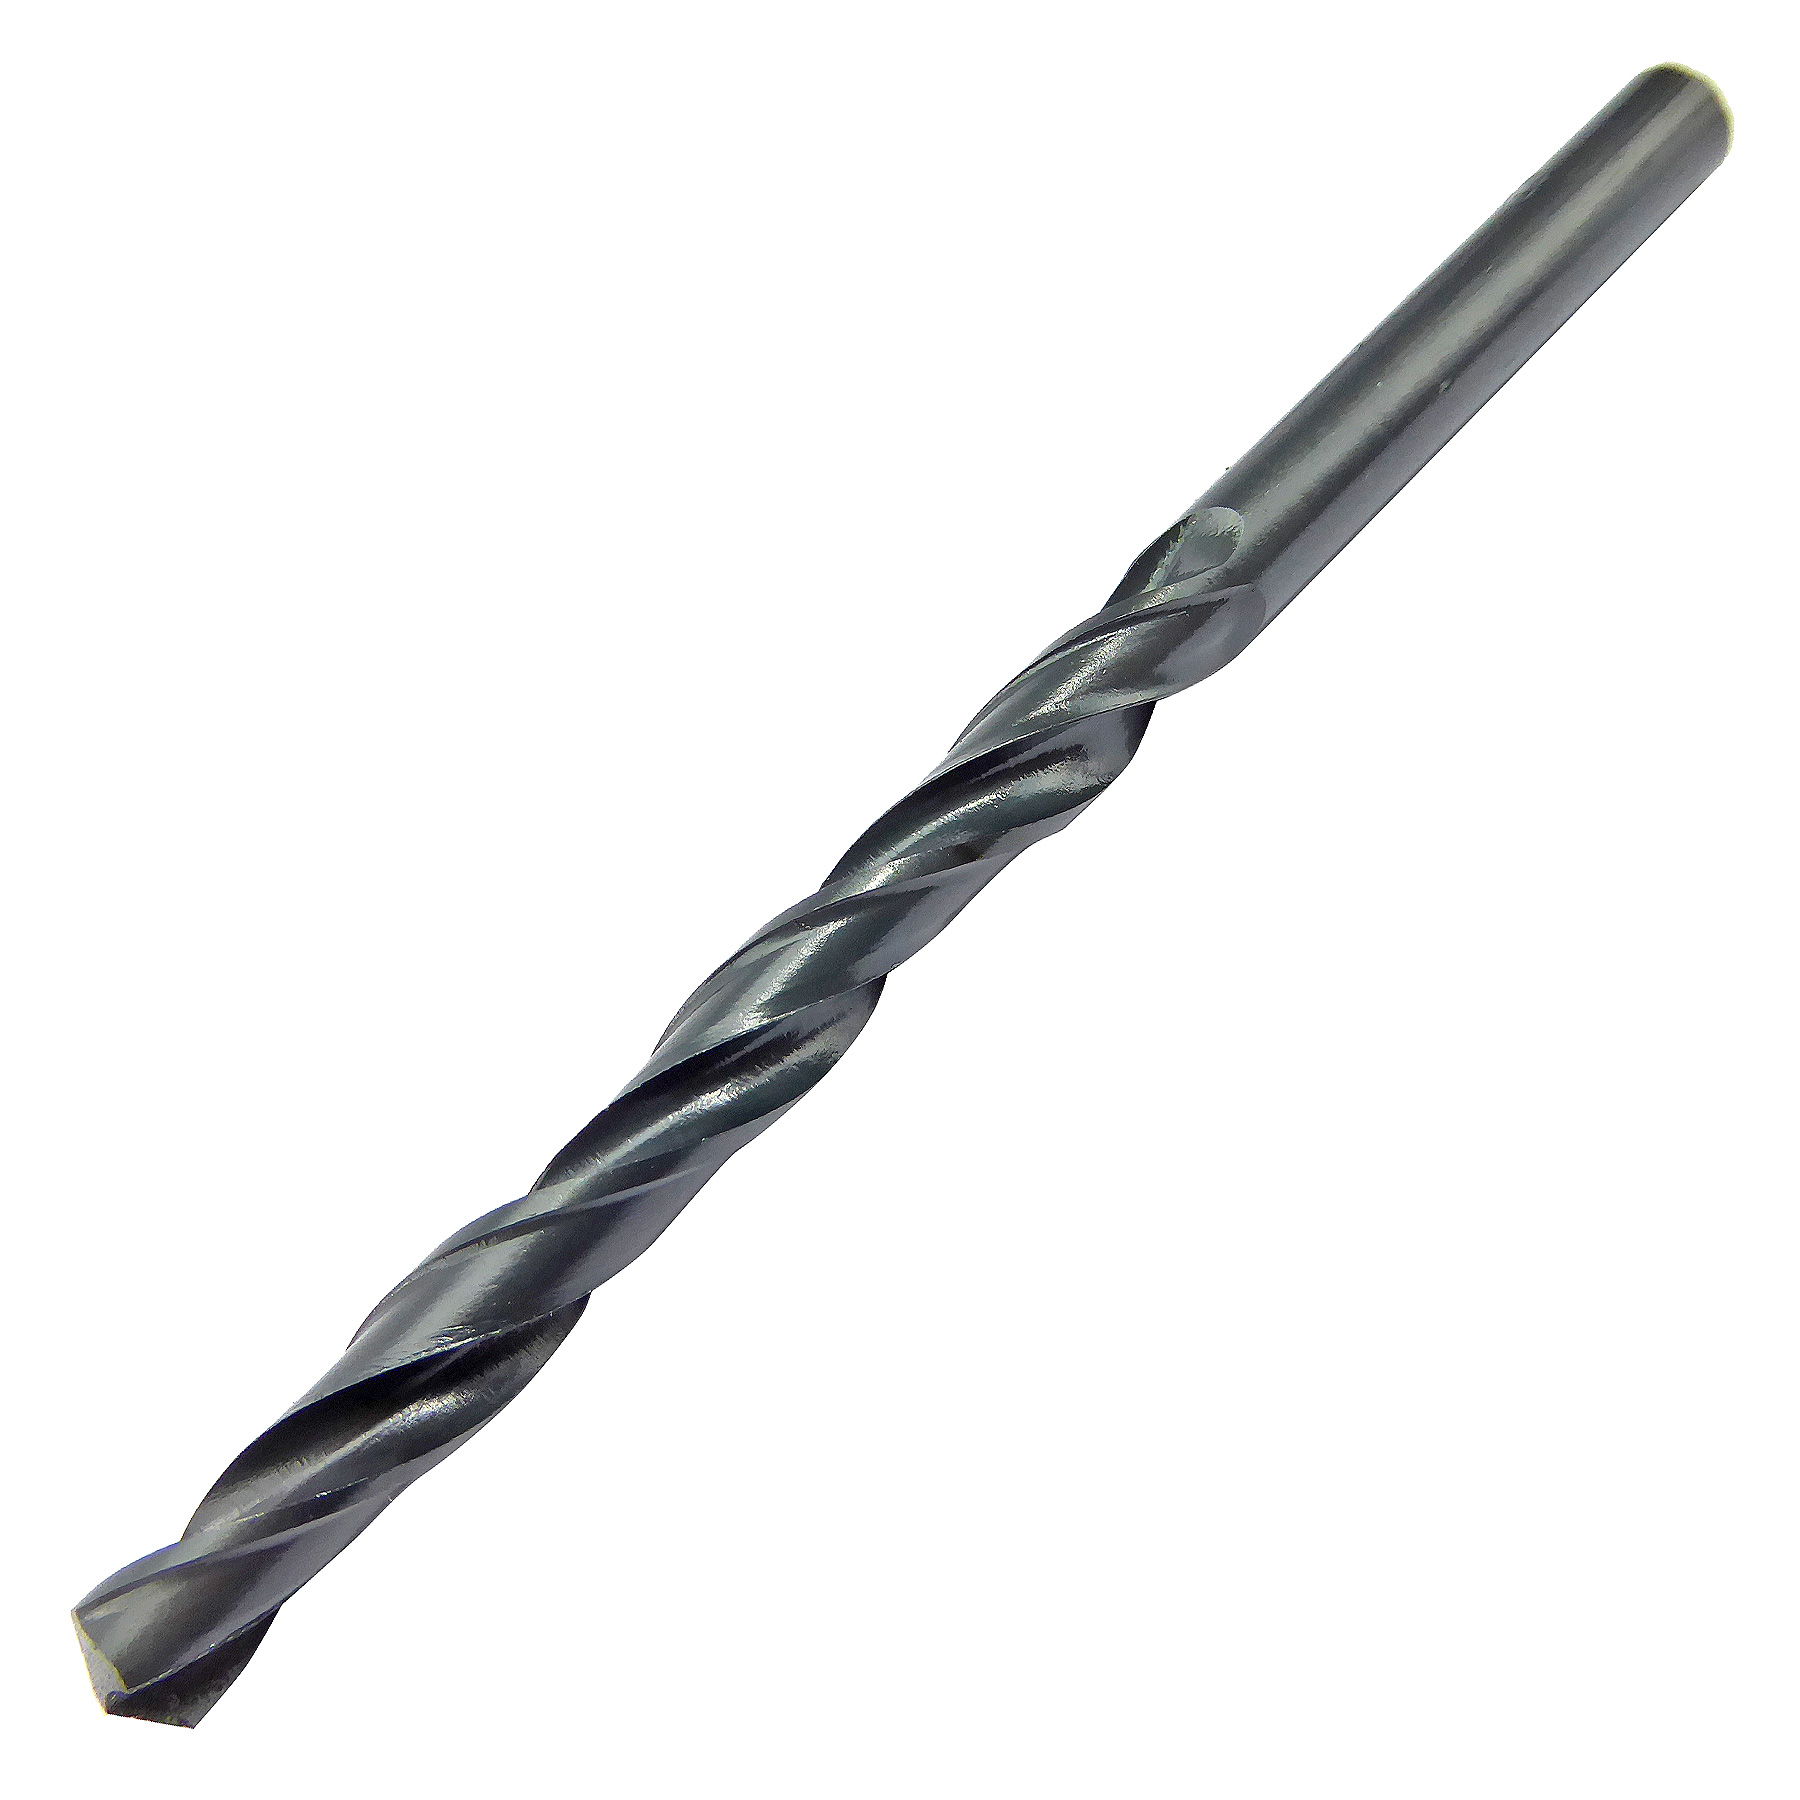 7.0mm x 109mm HSS Roll Forged Jobber Drill Pack of 10